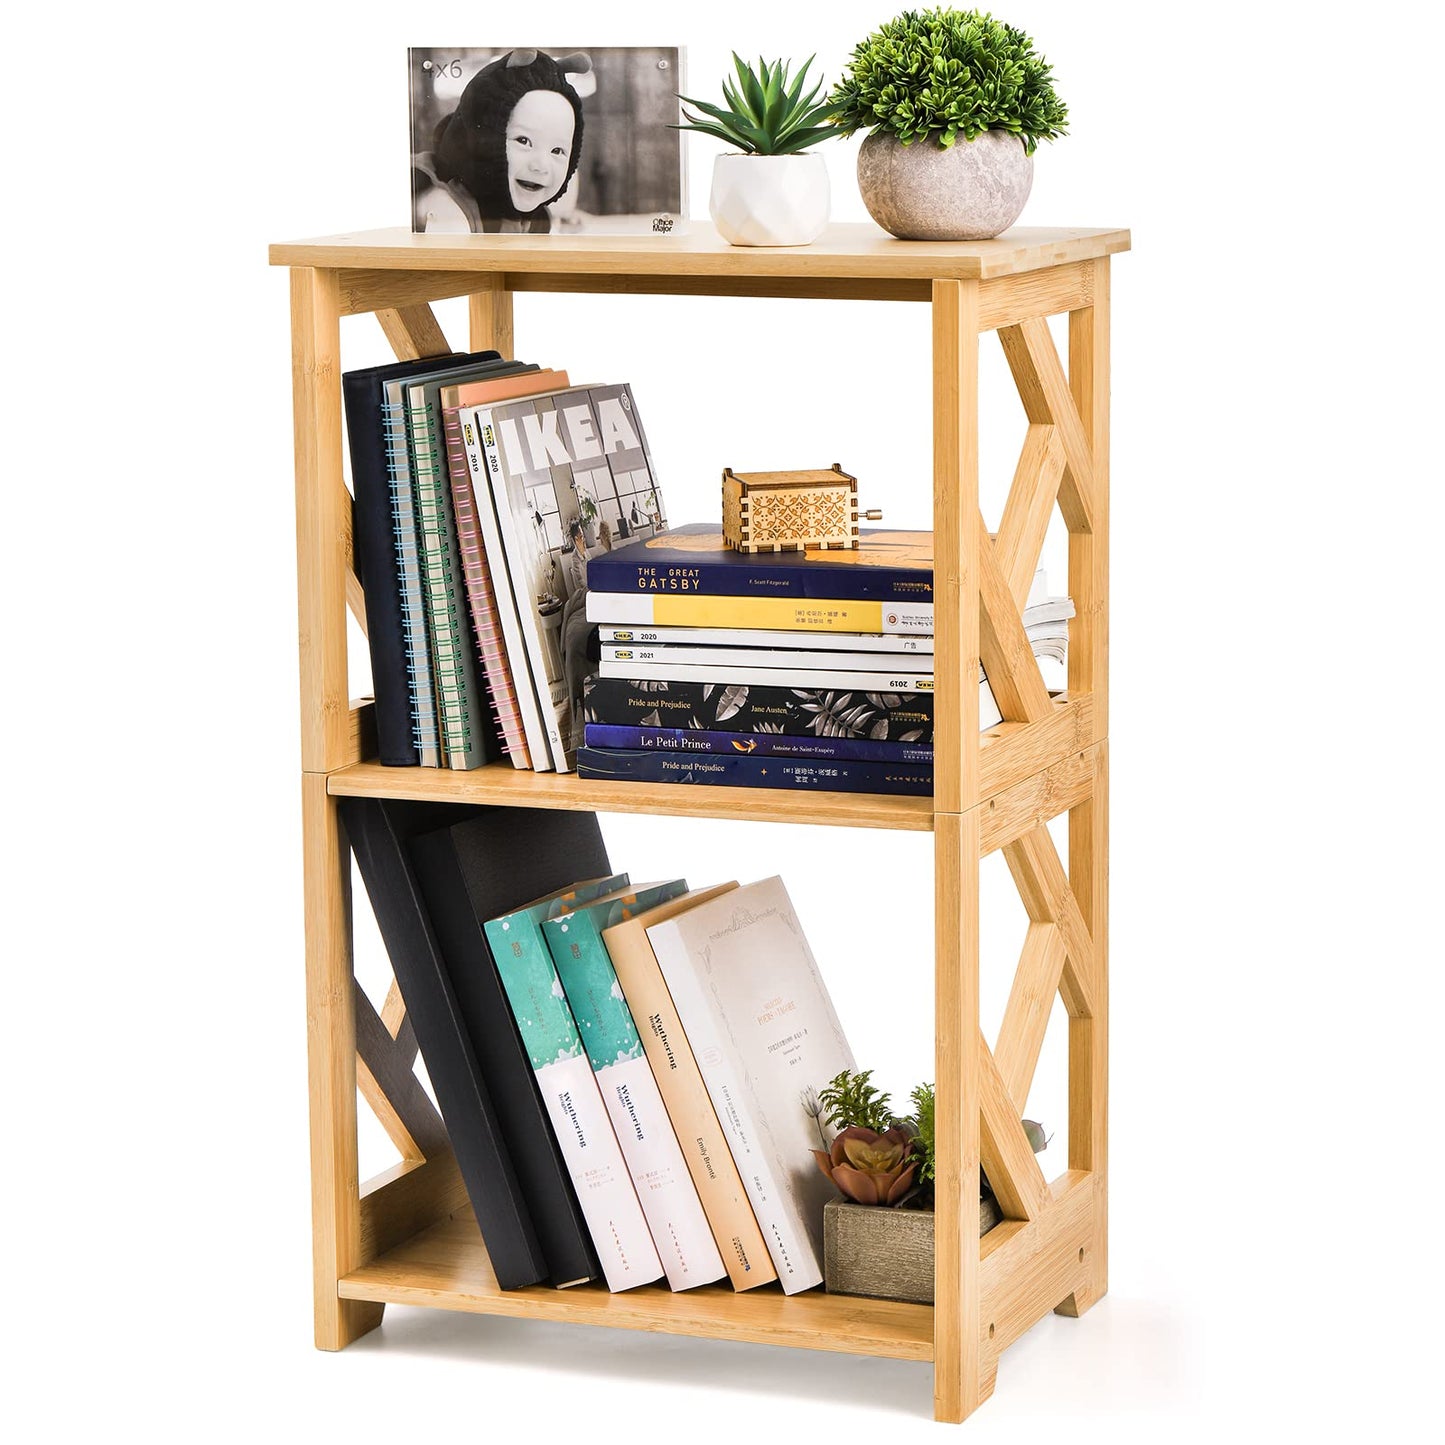 Frcctre 3-Tier Bamboo End Table Side Table Bedside Nightstand, 2 Shelf Small Bookshelf Bookcase, Multifunctional Display Rack Storage Stand for Bathroom, Bedroom and Living Room